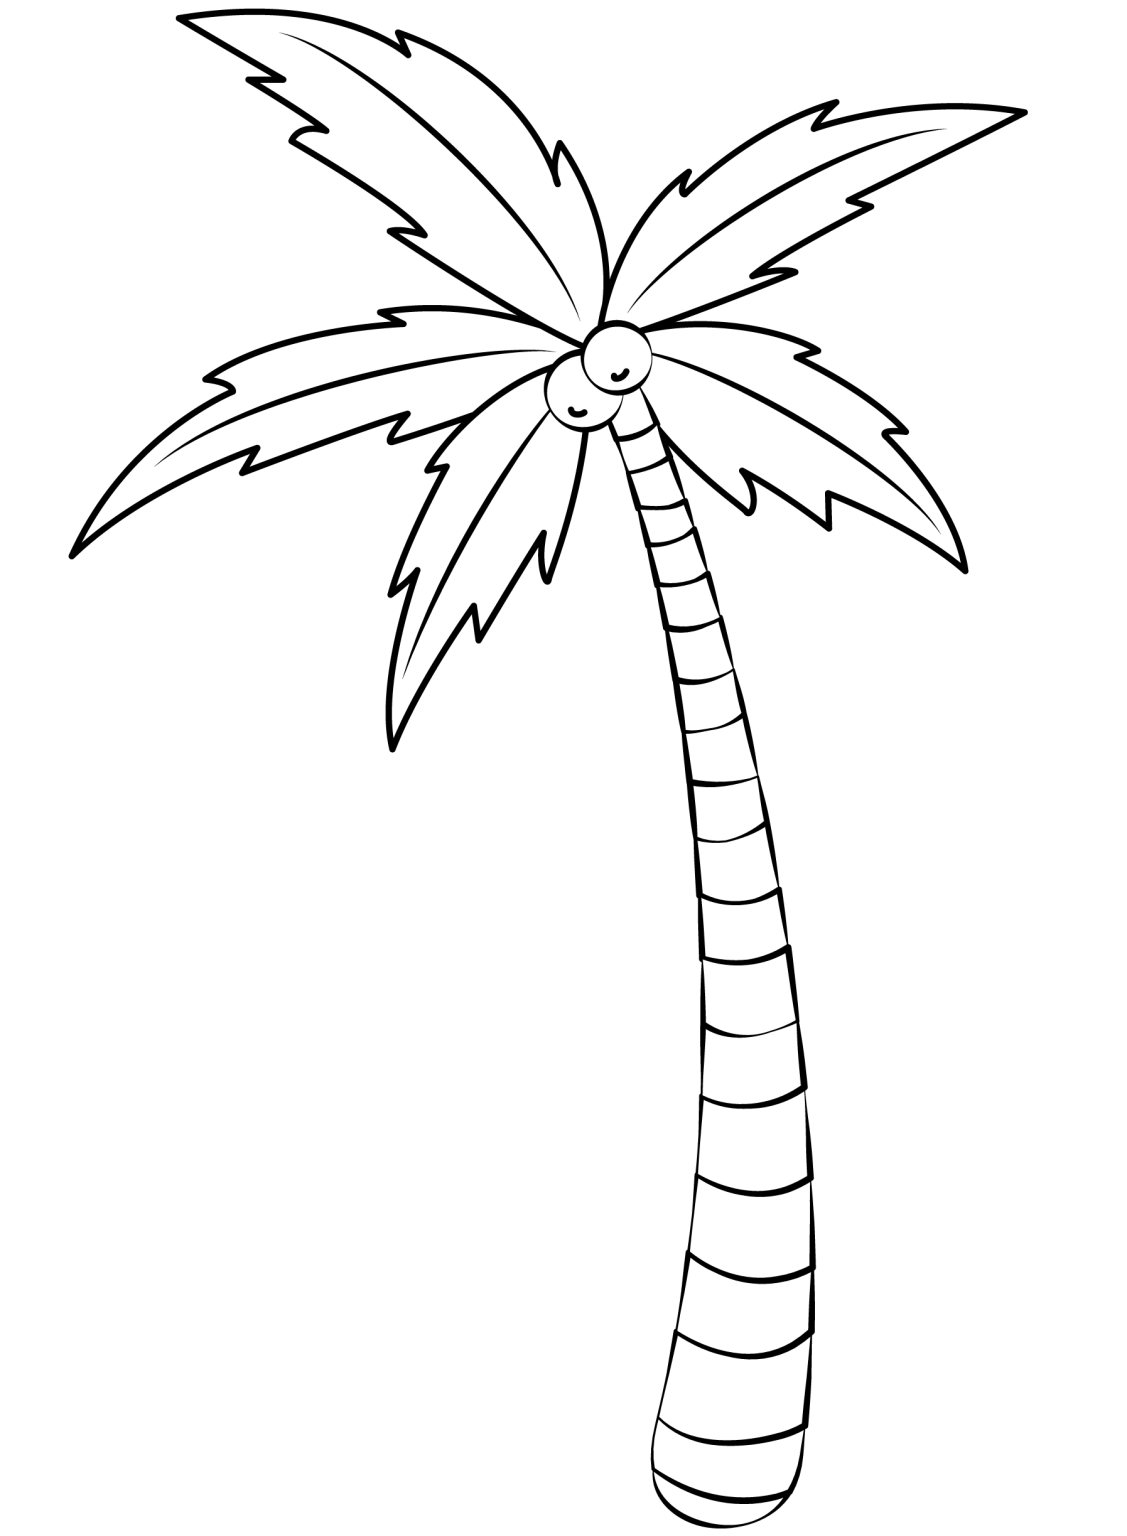 Palm Tree Coloring Pages: Tropical Fun for Kids of All Ages